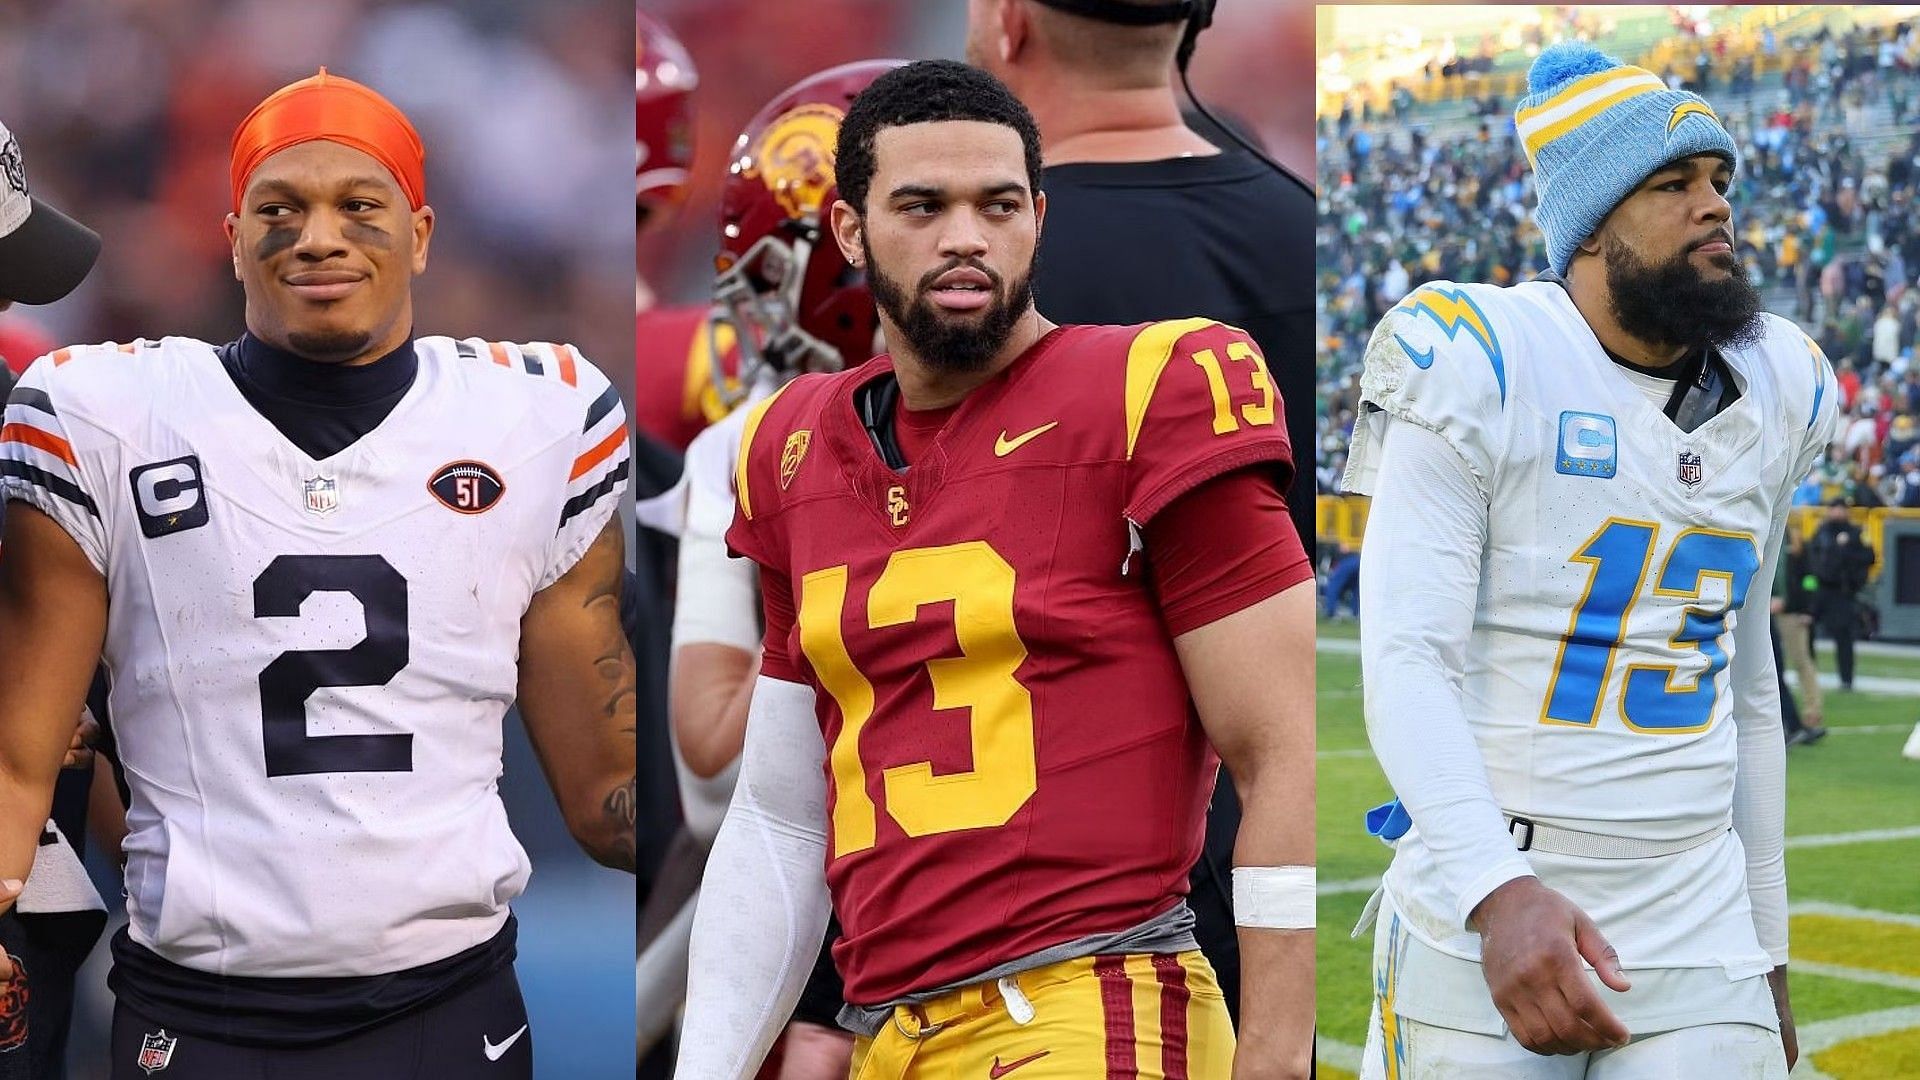 NFL analyst calls for Chicago Bears to add even more ammunition to Keenan Allen and DJ Moore to avoid